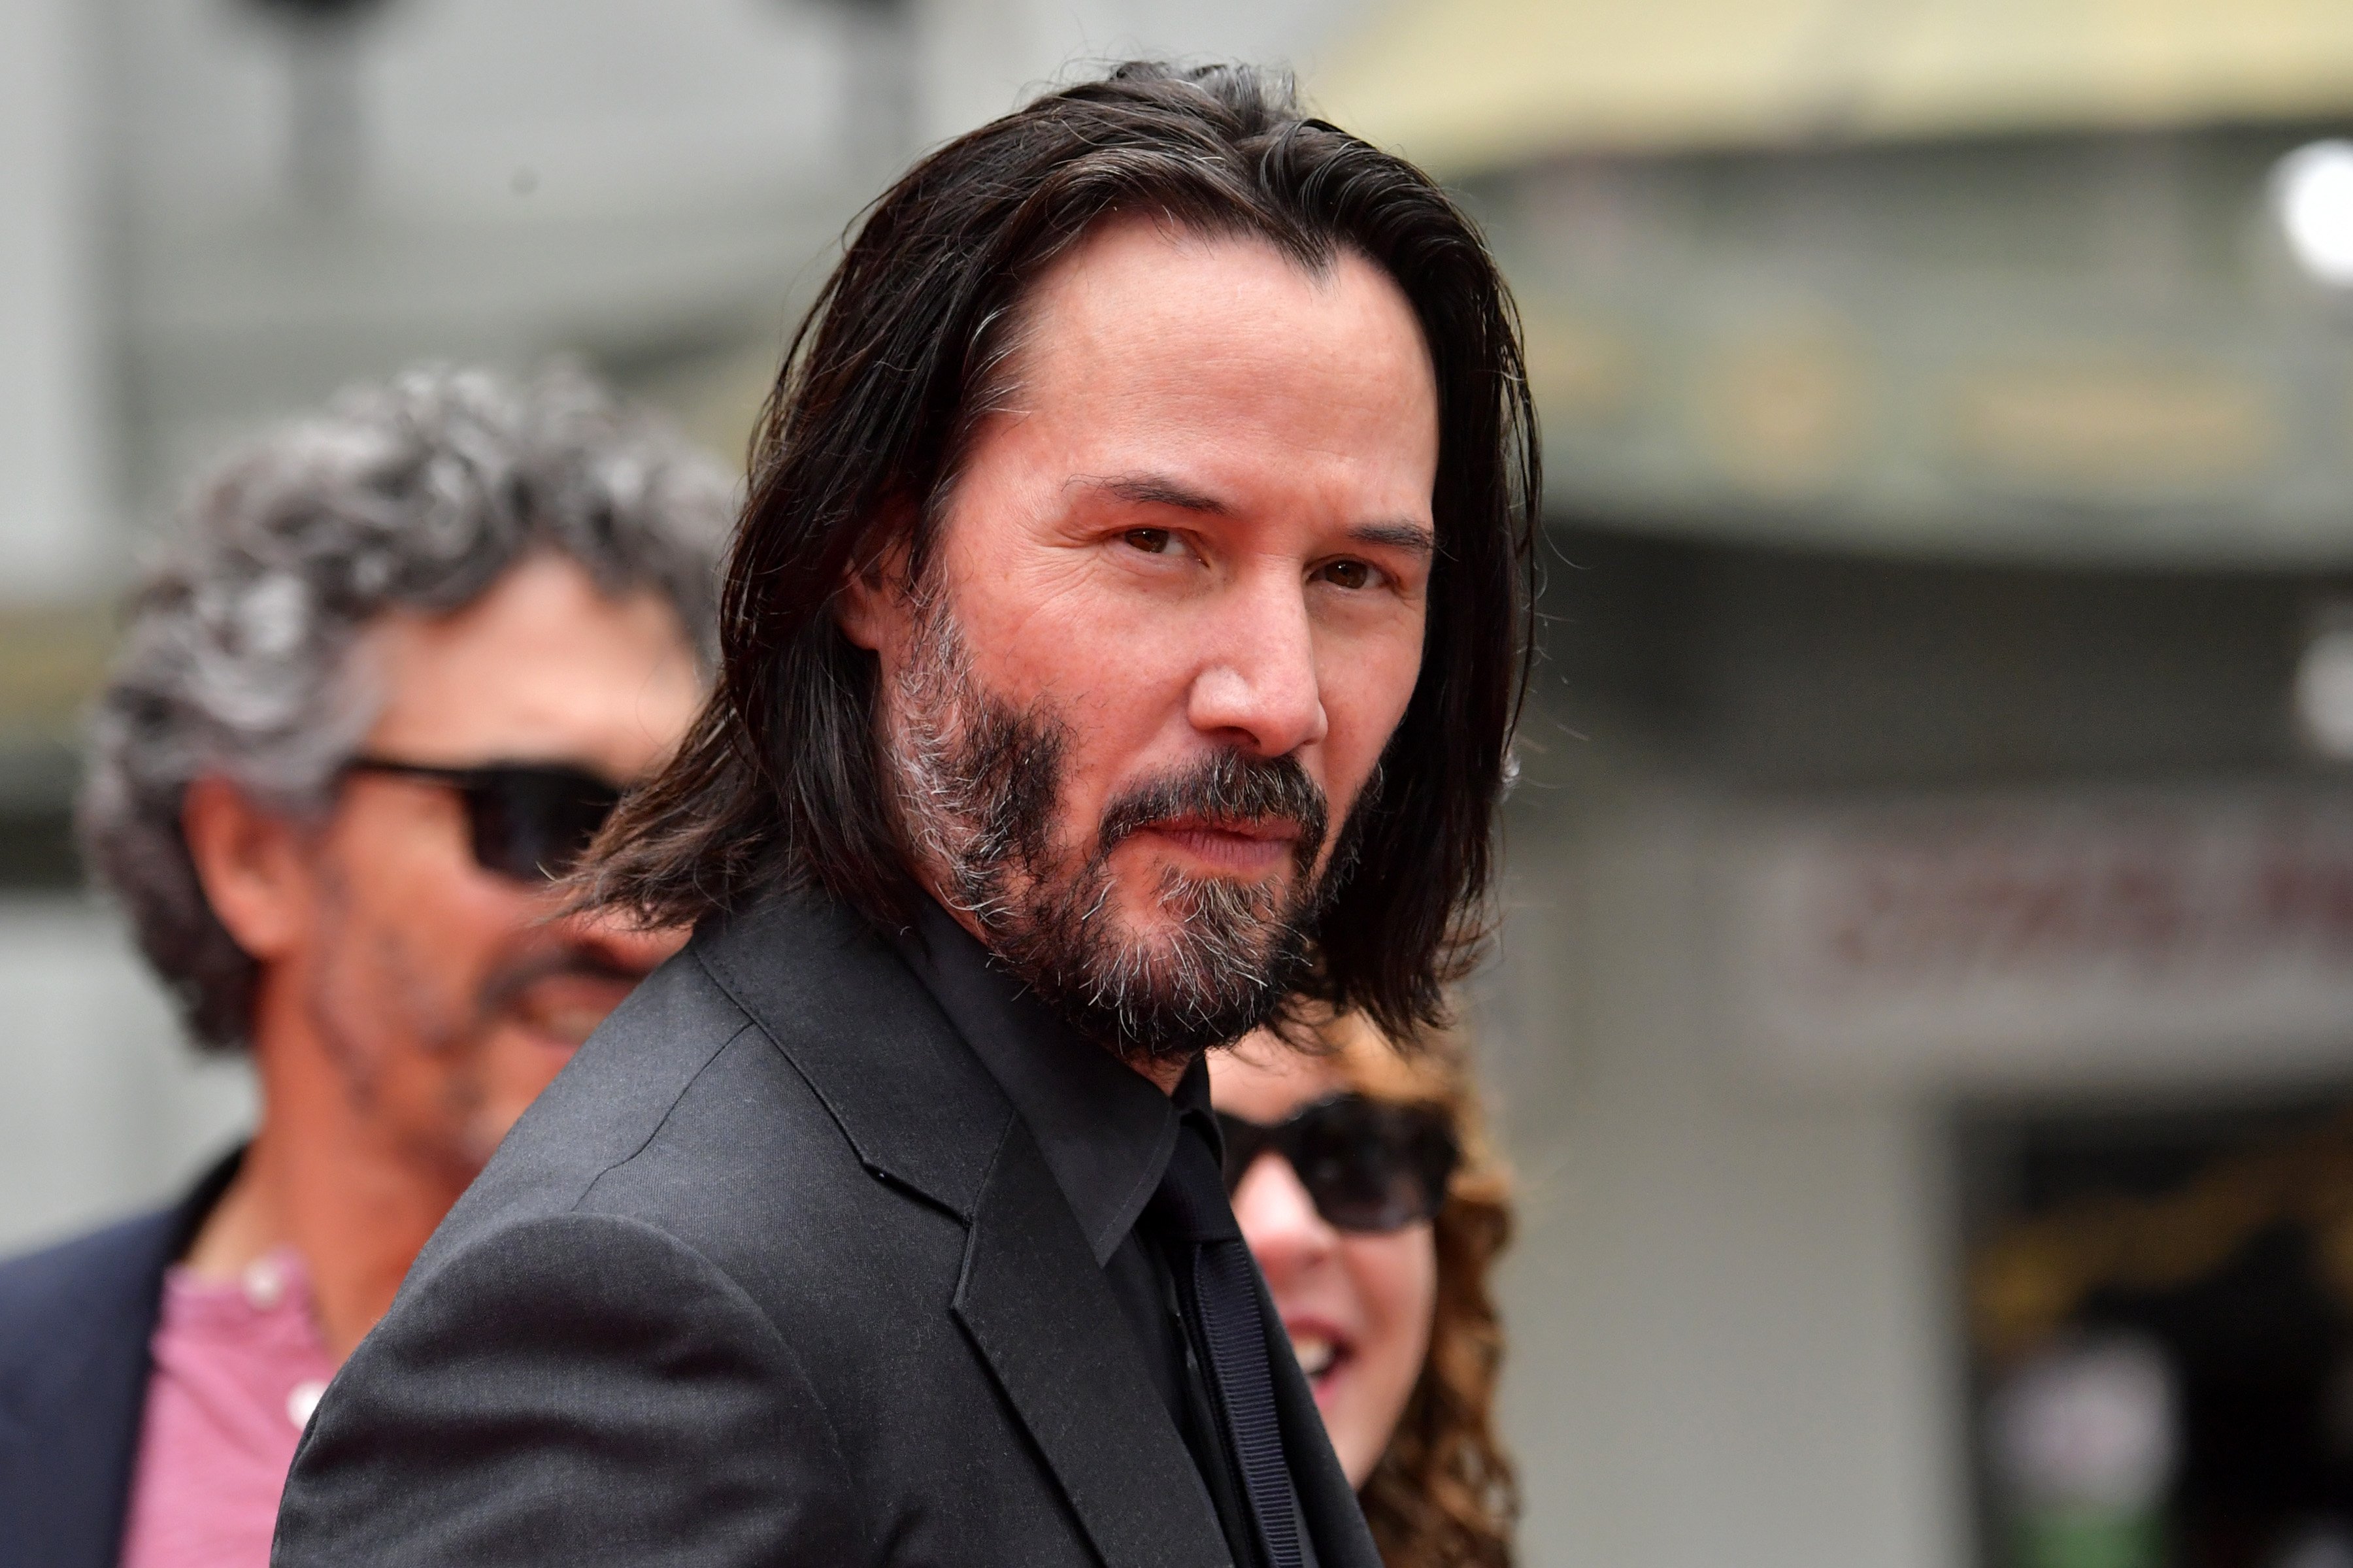 Keanu Reeves arrives for his handprint ceremonyon May 14, 2019 | Photo: Getty Images.